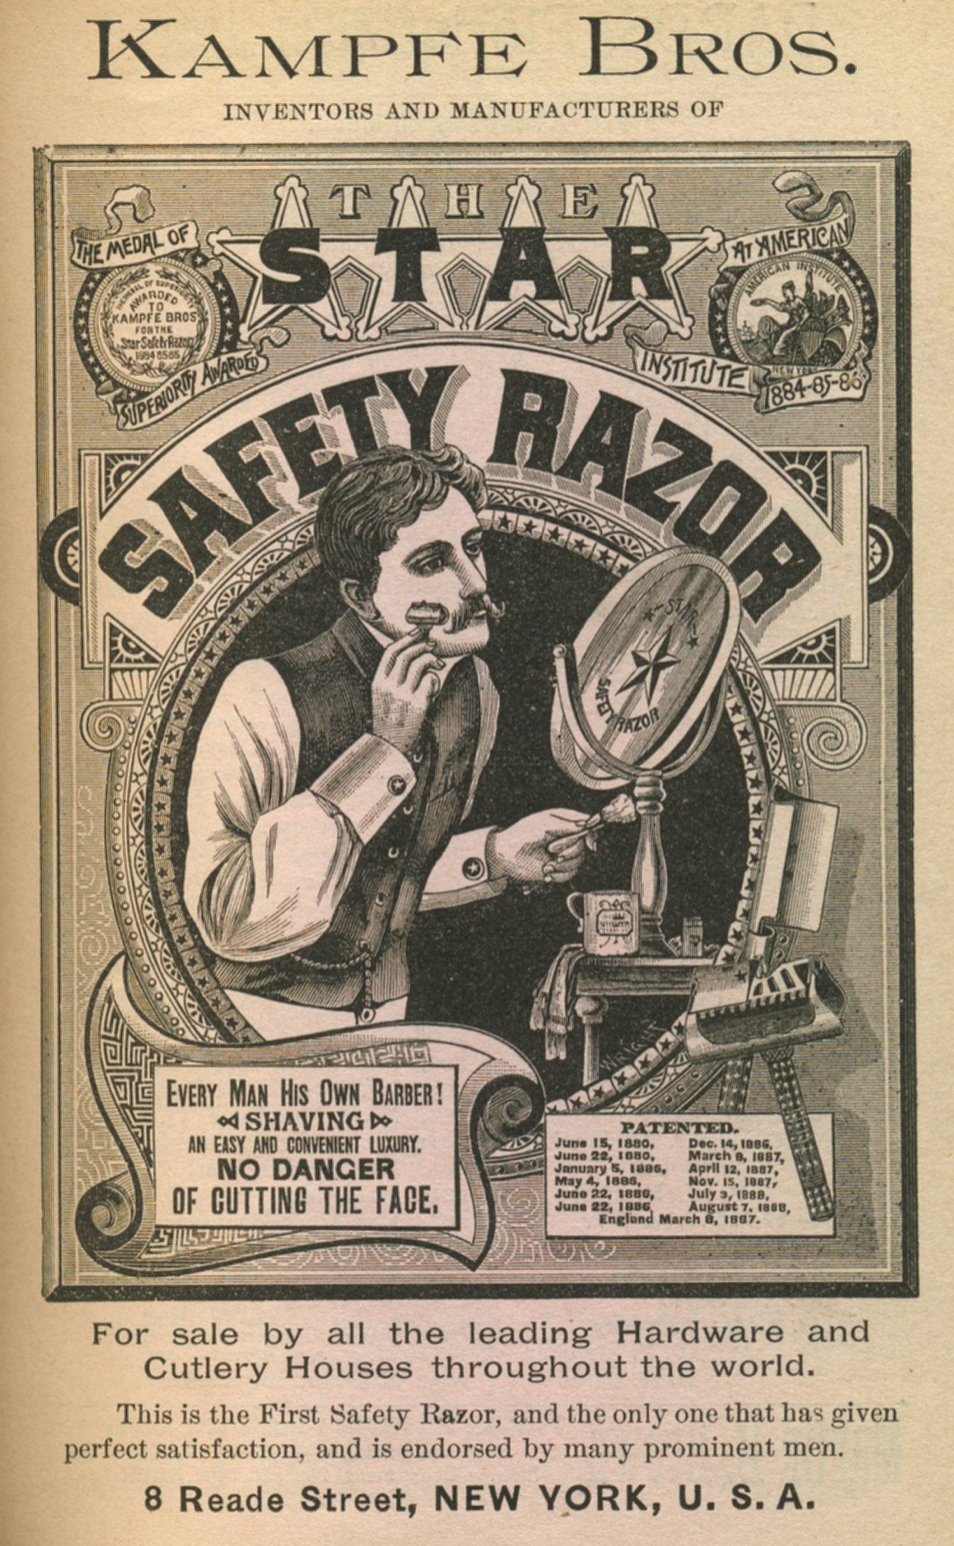 The Kampfe Brothers - A Brief History of Their Inventions and Safety Razors